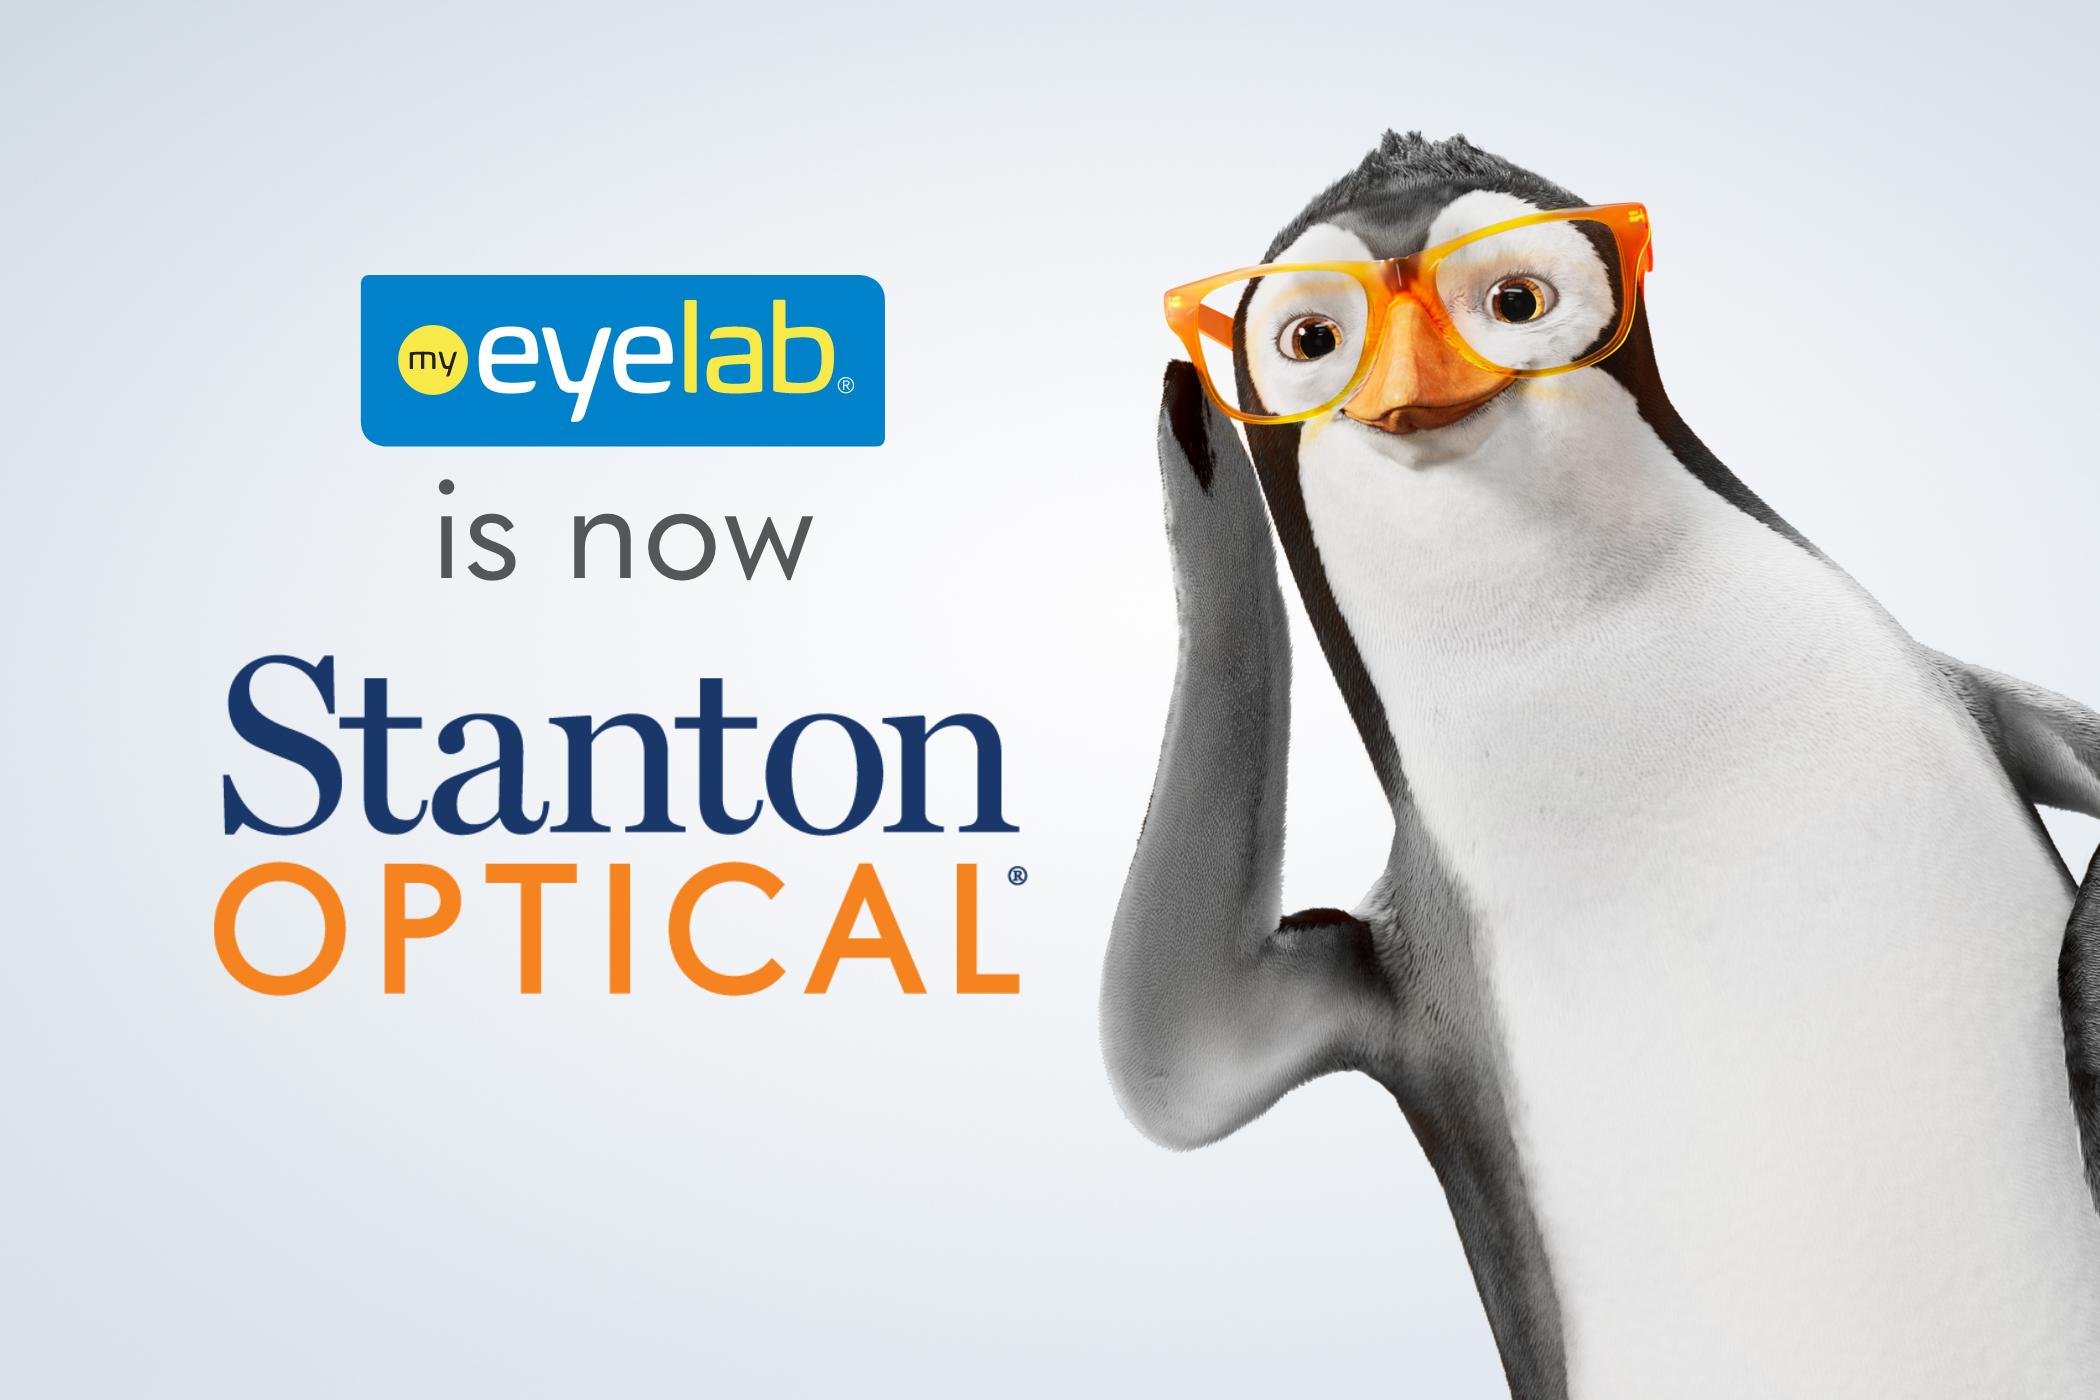 My Eyelab is now Stanton Optical! Check out our perks in addition to faster service and better value Stanton Optical Richardson (469)830-2949